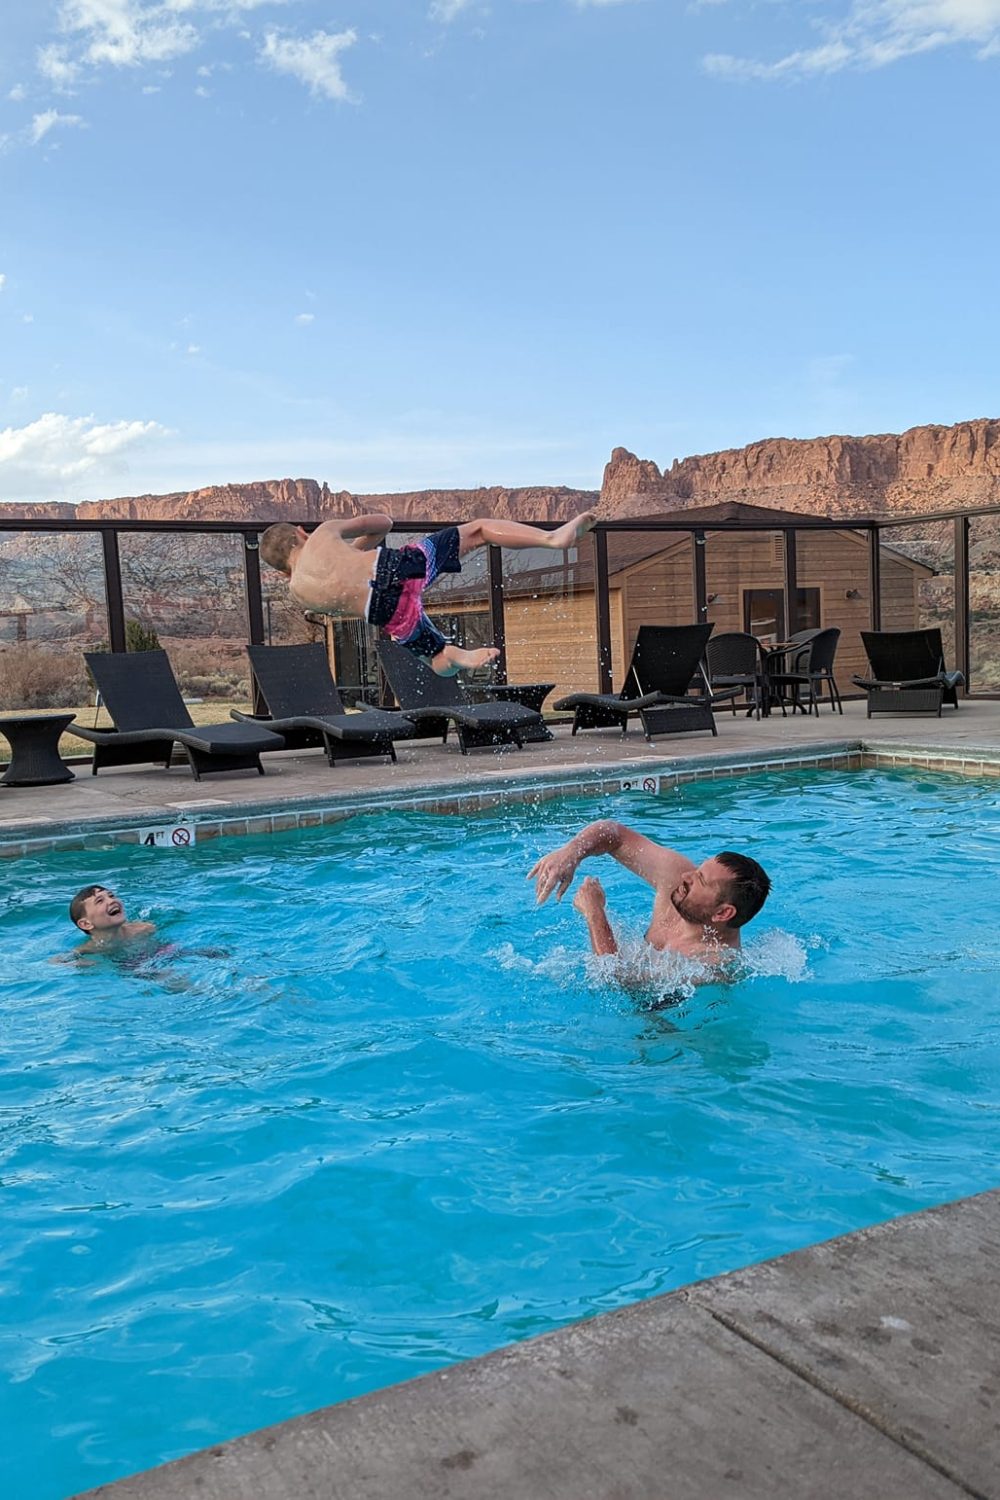 Swimming in the pool at Capitol Reef Resort.  Even the pool had a great view